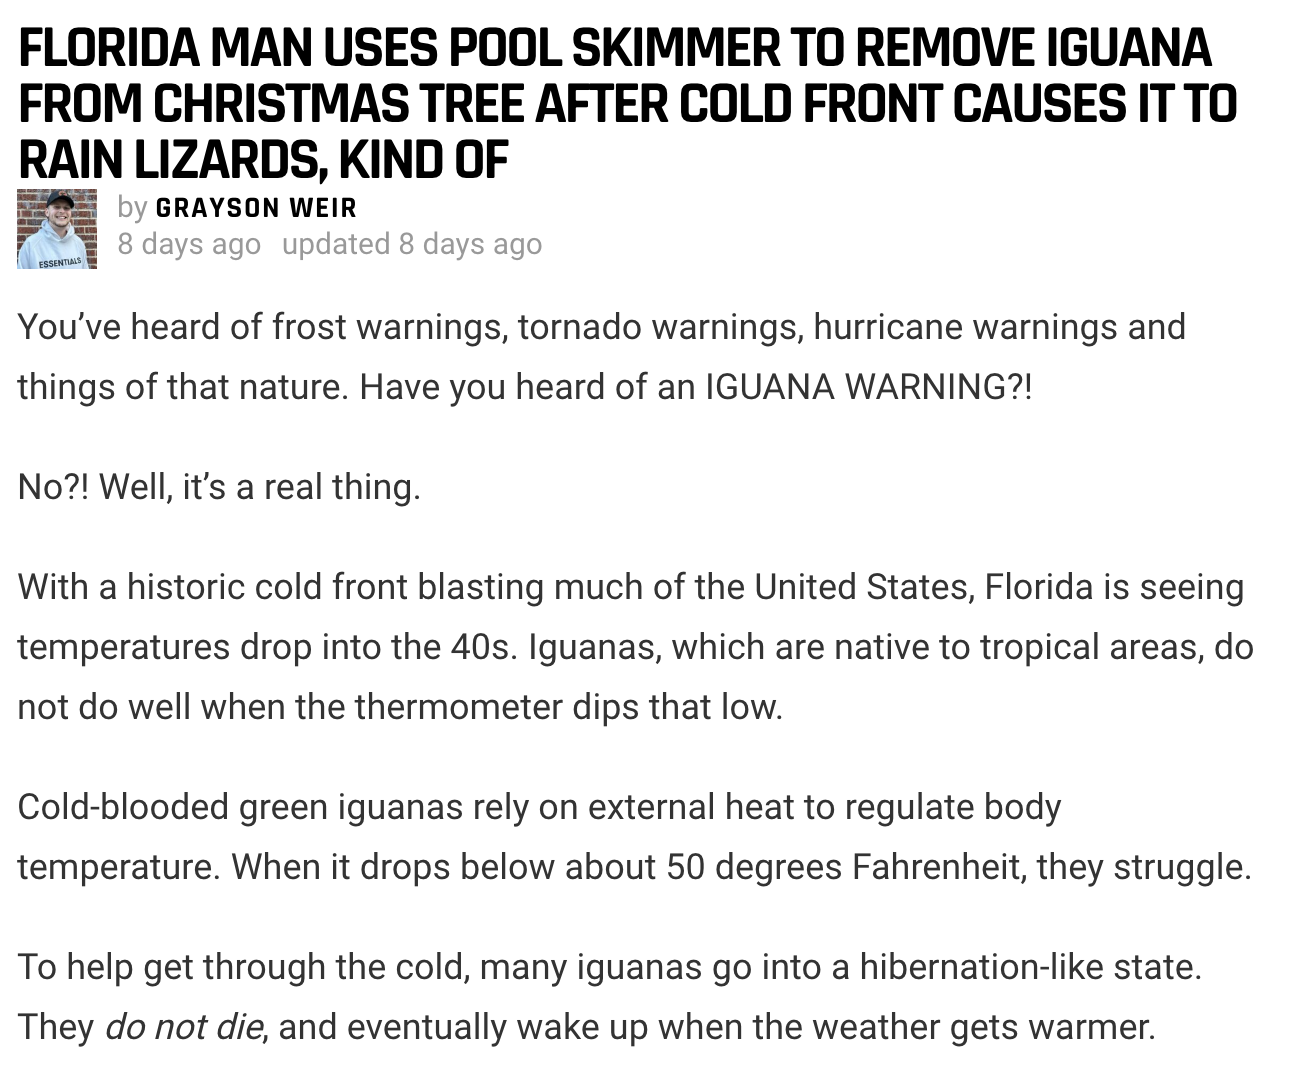 Best of Florida Man 2022 - document - Florida Man Uses Pool Skimmer To Remove Iguana From Christmas Tree After Cold Front Causes It To Rain Lizards, Kind Of by Grayson Weir 8 days ago updated 8 days ago Essentials You've heard of frost warnings, tornado w